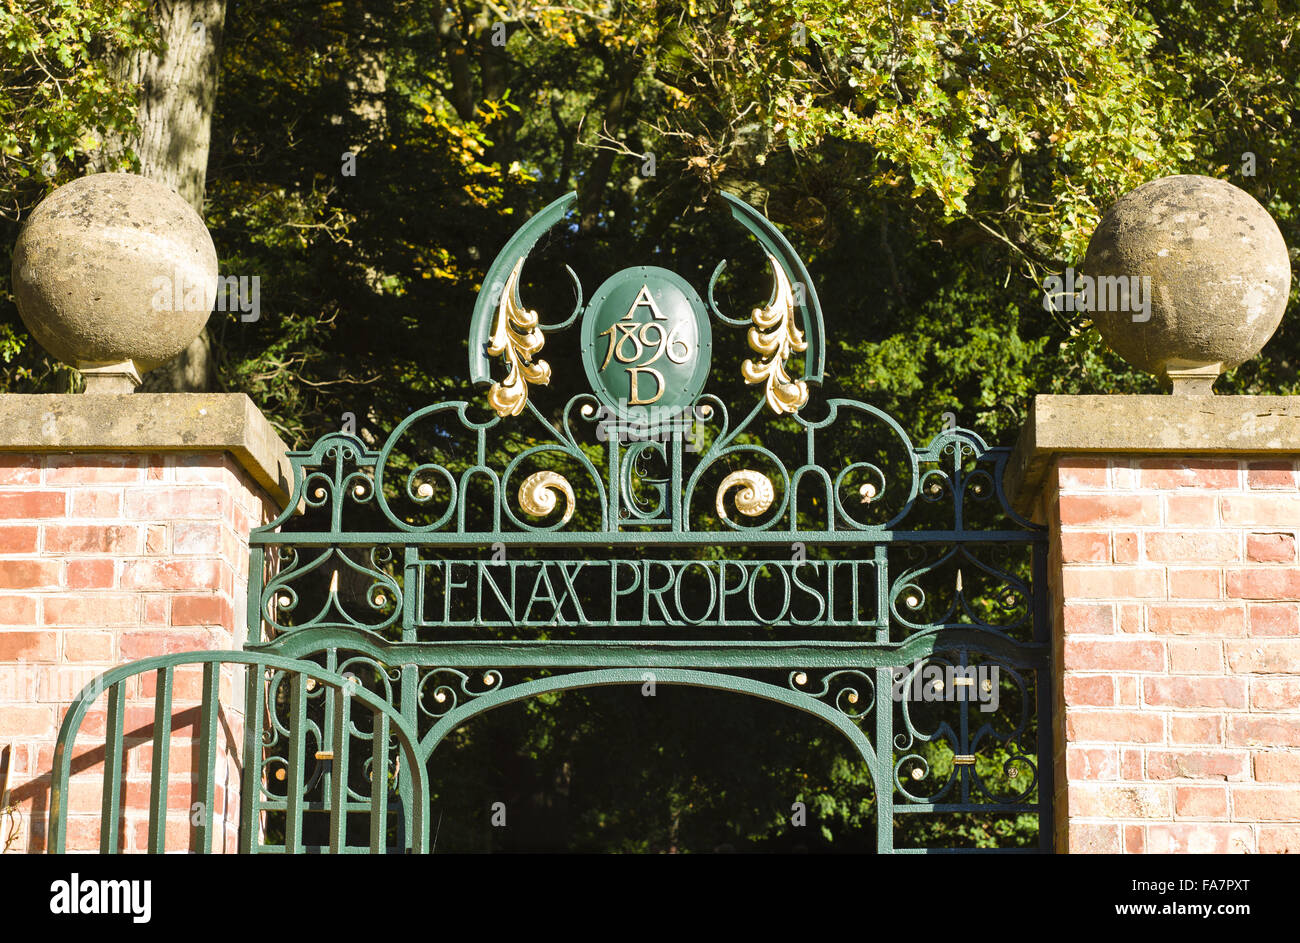 Wrought-iron gate to the Kitchen Garden at Tyntesfield, North Somerset. The shield is inscribed '1896 A.D. in top arch decoration. Below this is the Latin quotation 'TENAX PROPOSITI', meaning 'Firm of purpose'. Stock Photo